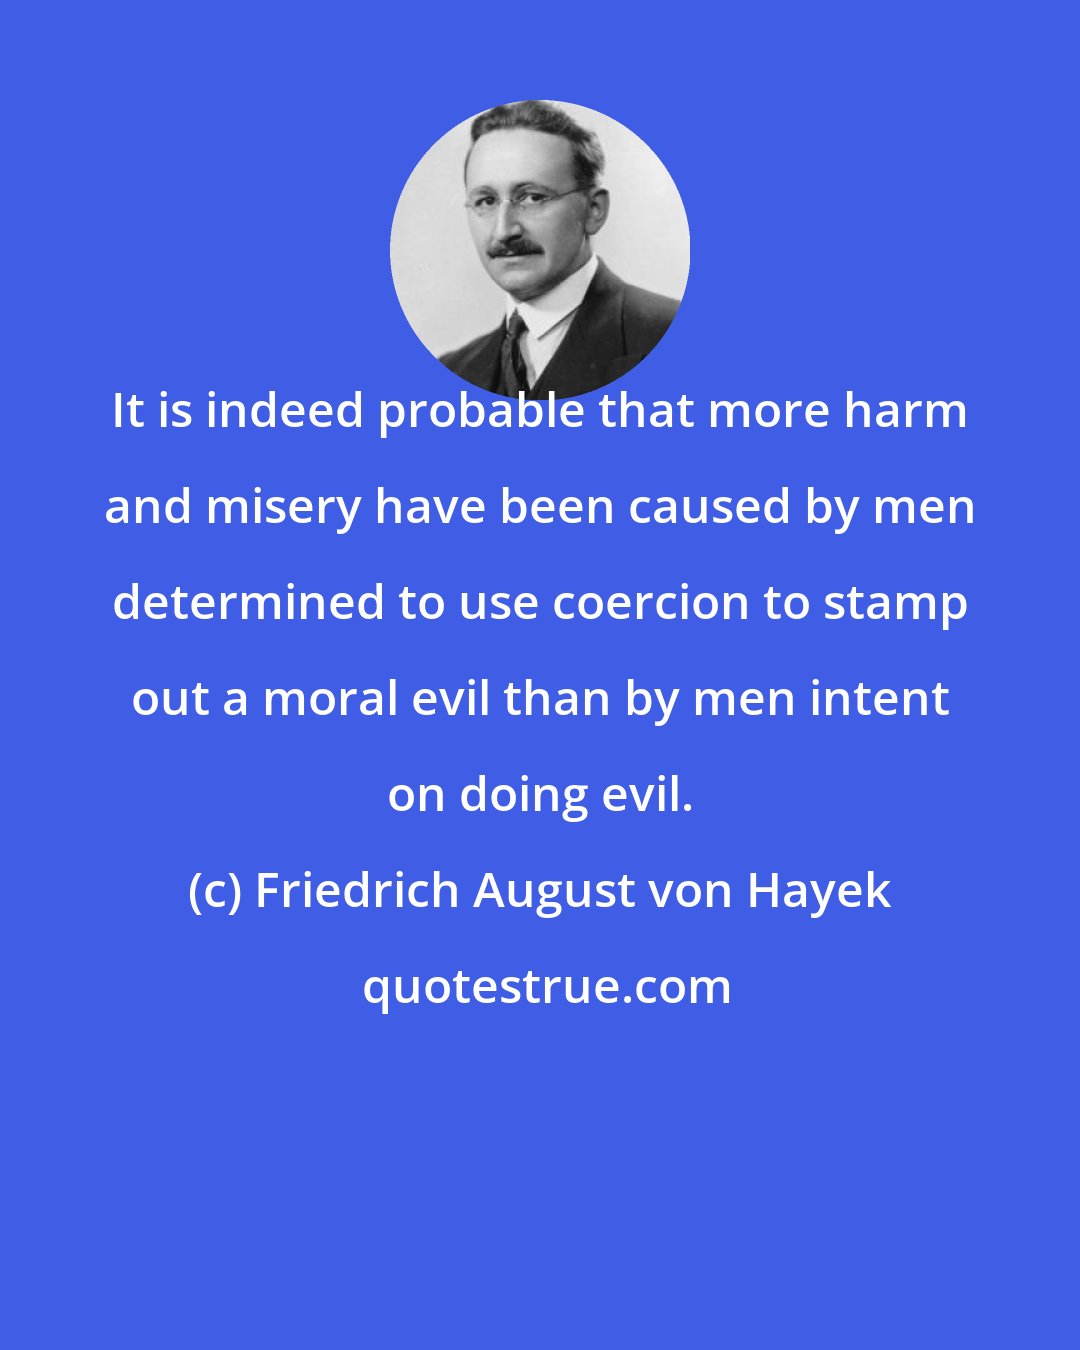 Friedrich August von Hayek: It is indeed probable that more harm and misery have been caused by men determined to use coercion to stamp out a moral evil than by men intent on doing evil.